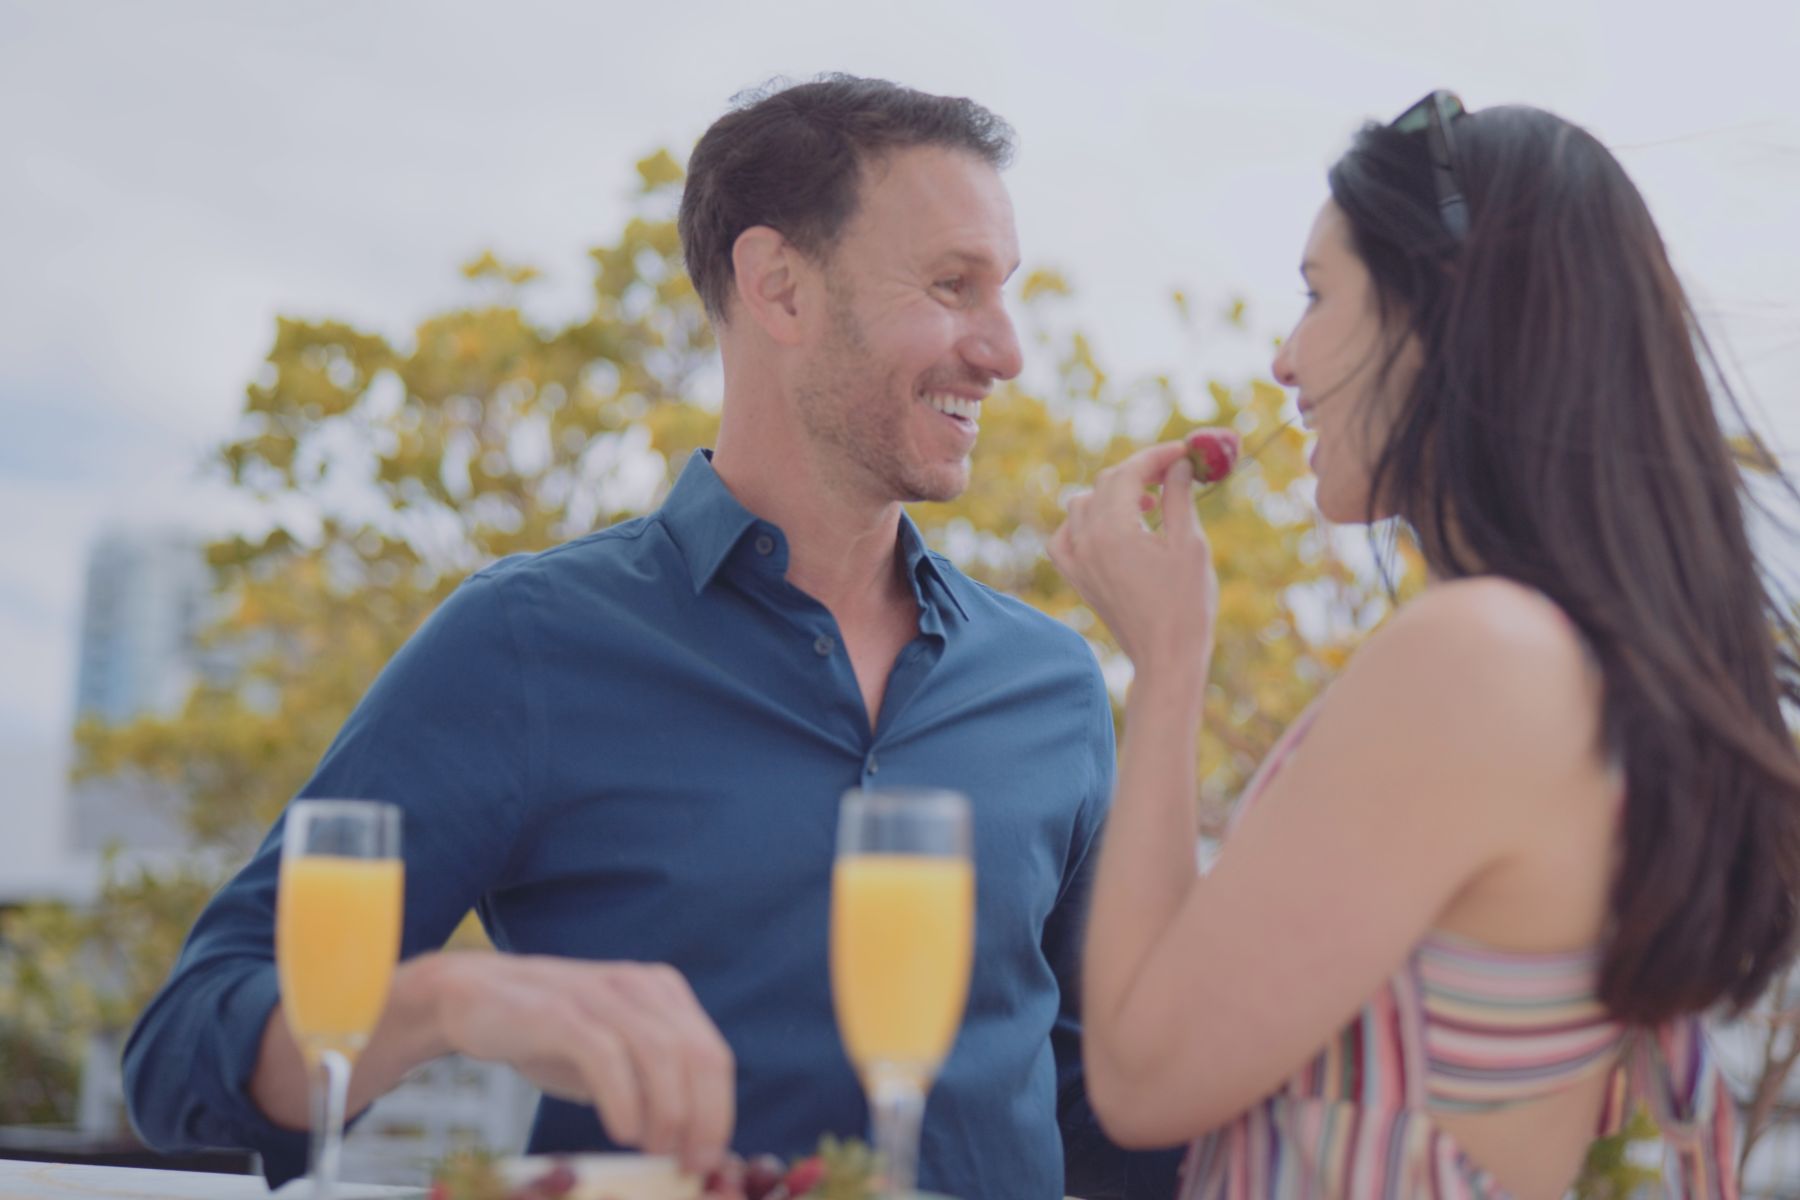 Macken Koya Bay Man and woman looking at each other by a plate of fruit and drinks while woman eats a strawberry